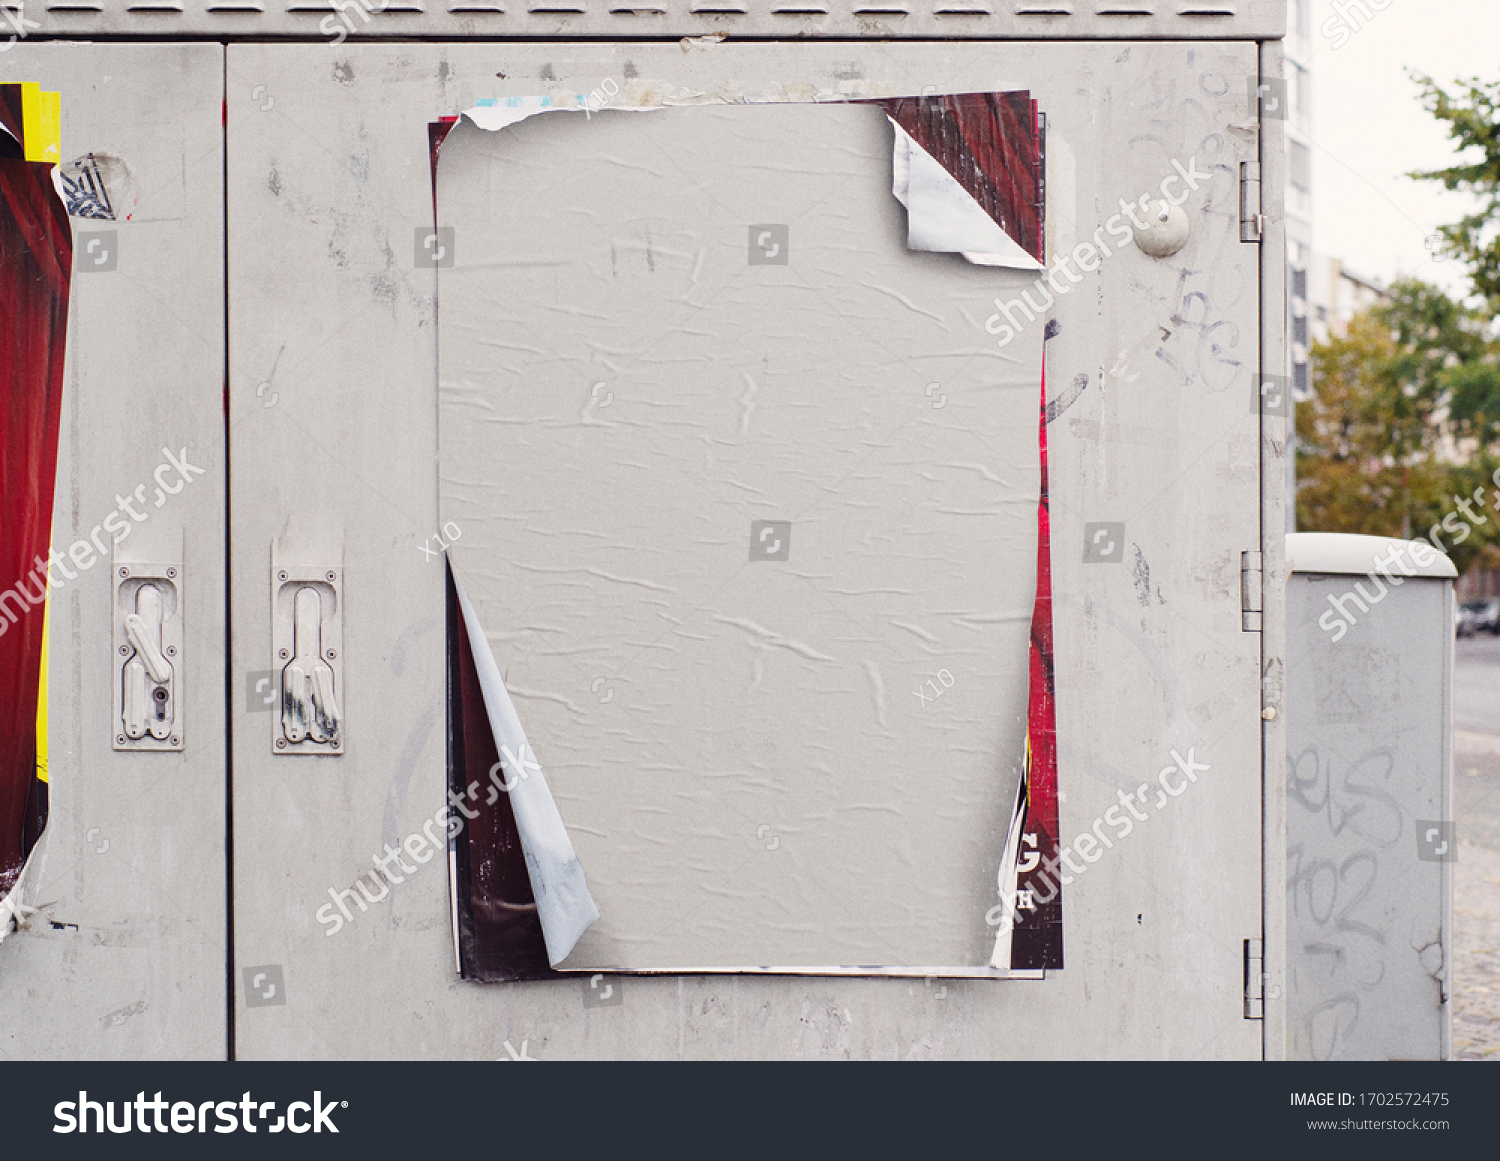 White wrinkled poster template. Glued paper mockup. Blank wheatpaste on textured wall. Empty street art sticker mock up. Clear urban glued advertising canvas. #1702572475